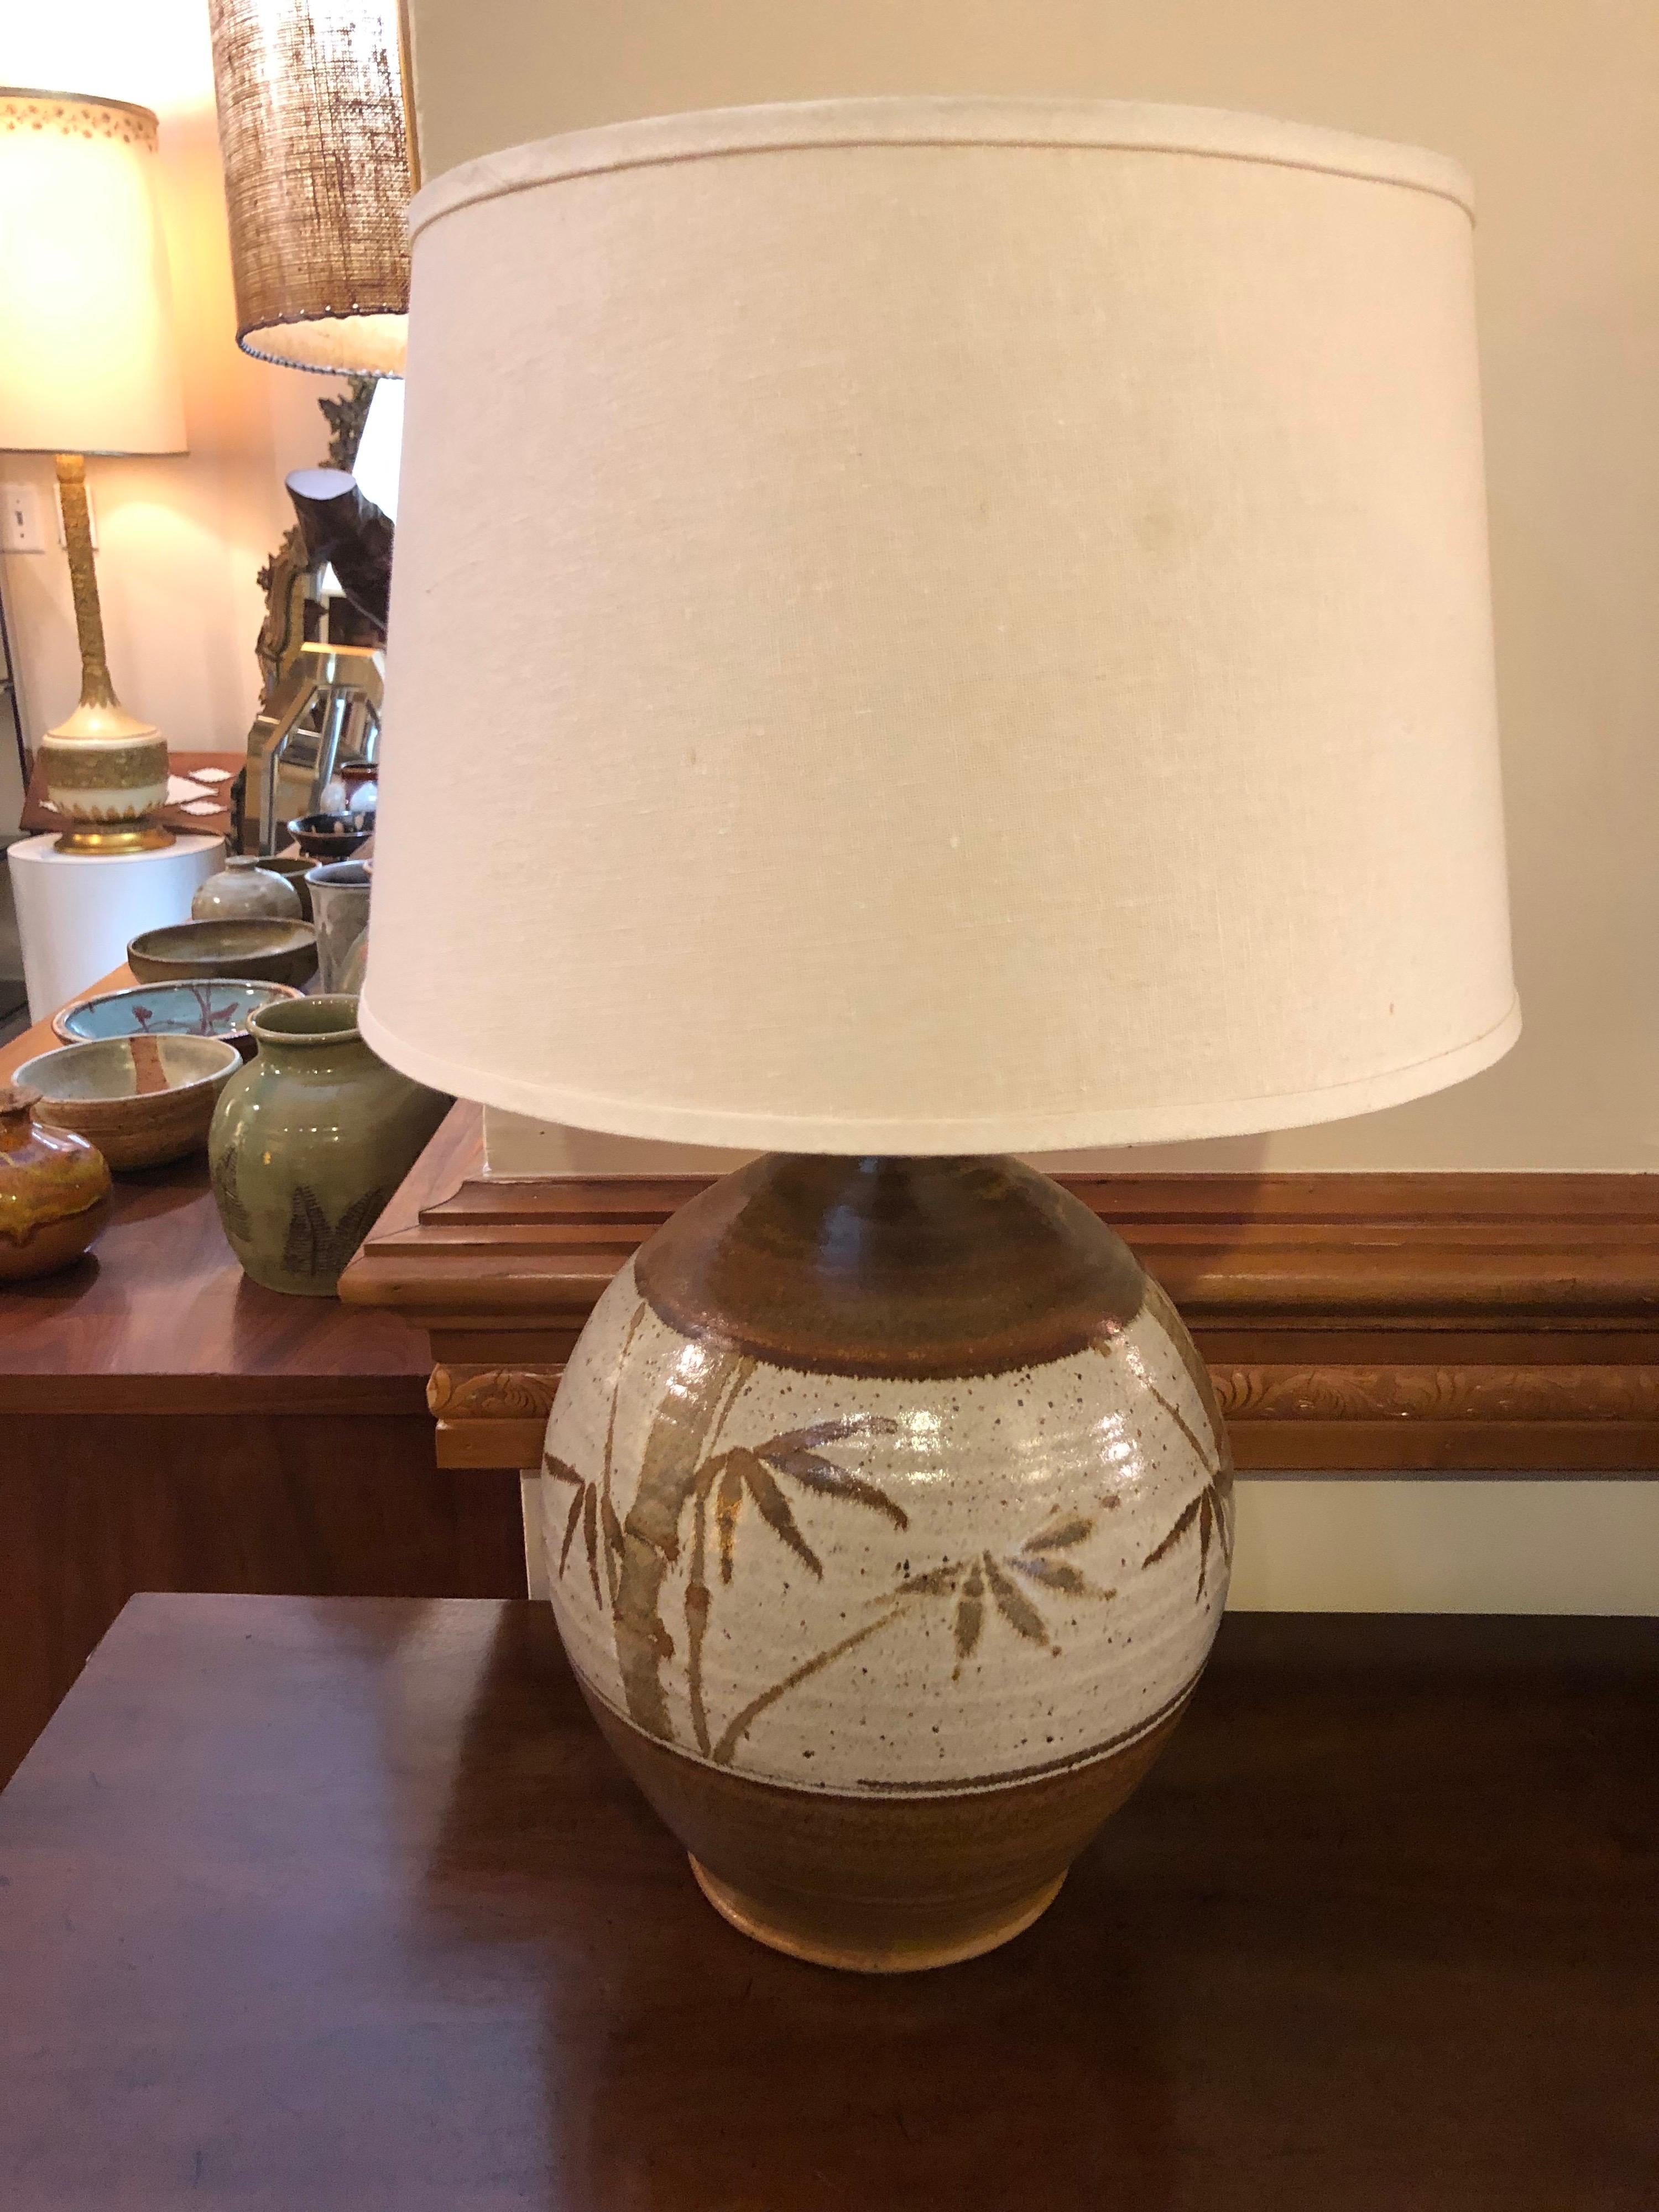 Ceramic bamboo table lamp with shade. Nice bulbous shape with earthones of brown and white. Drum shade to complement on top.